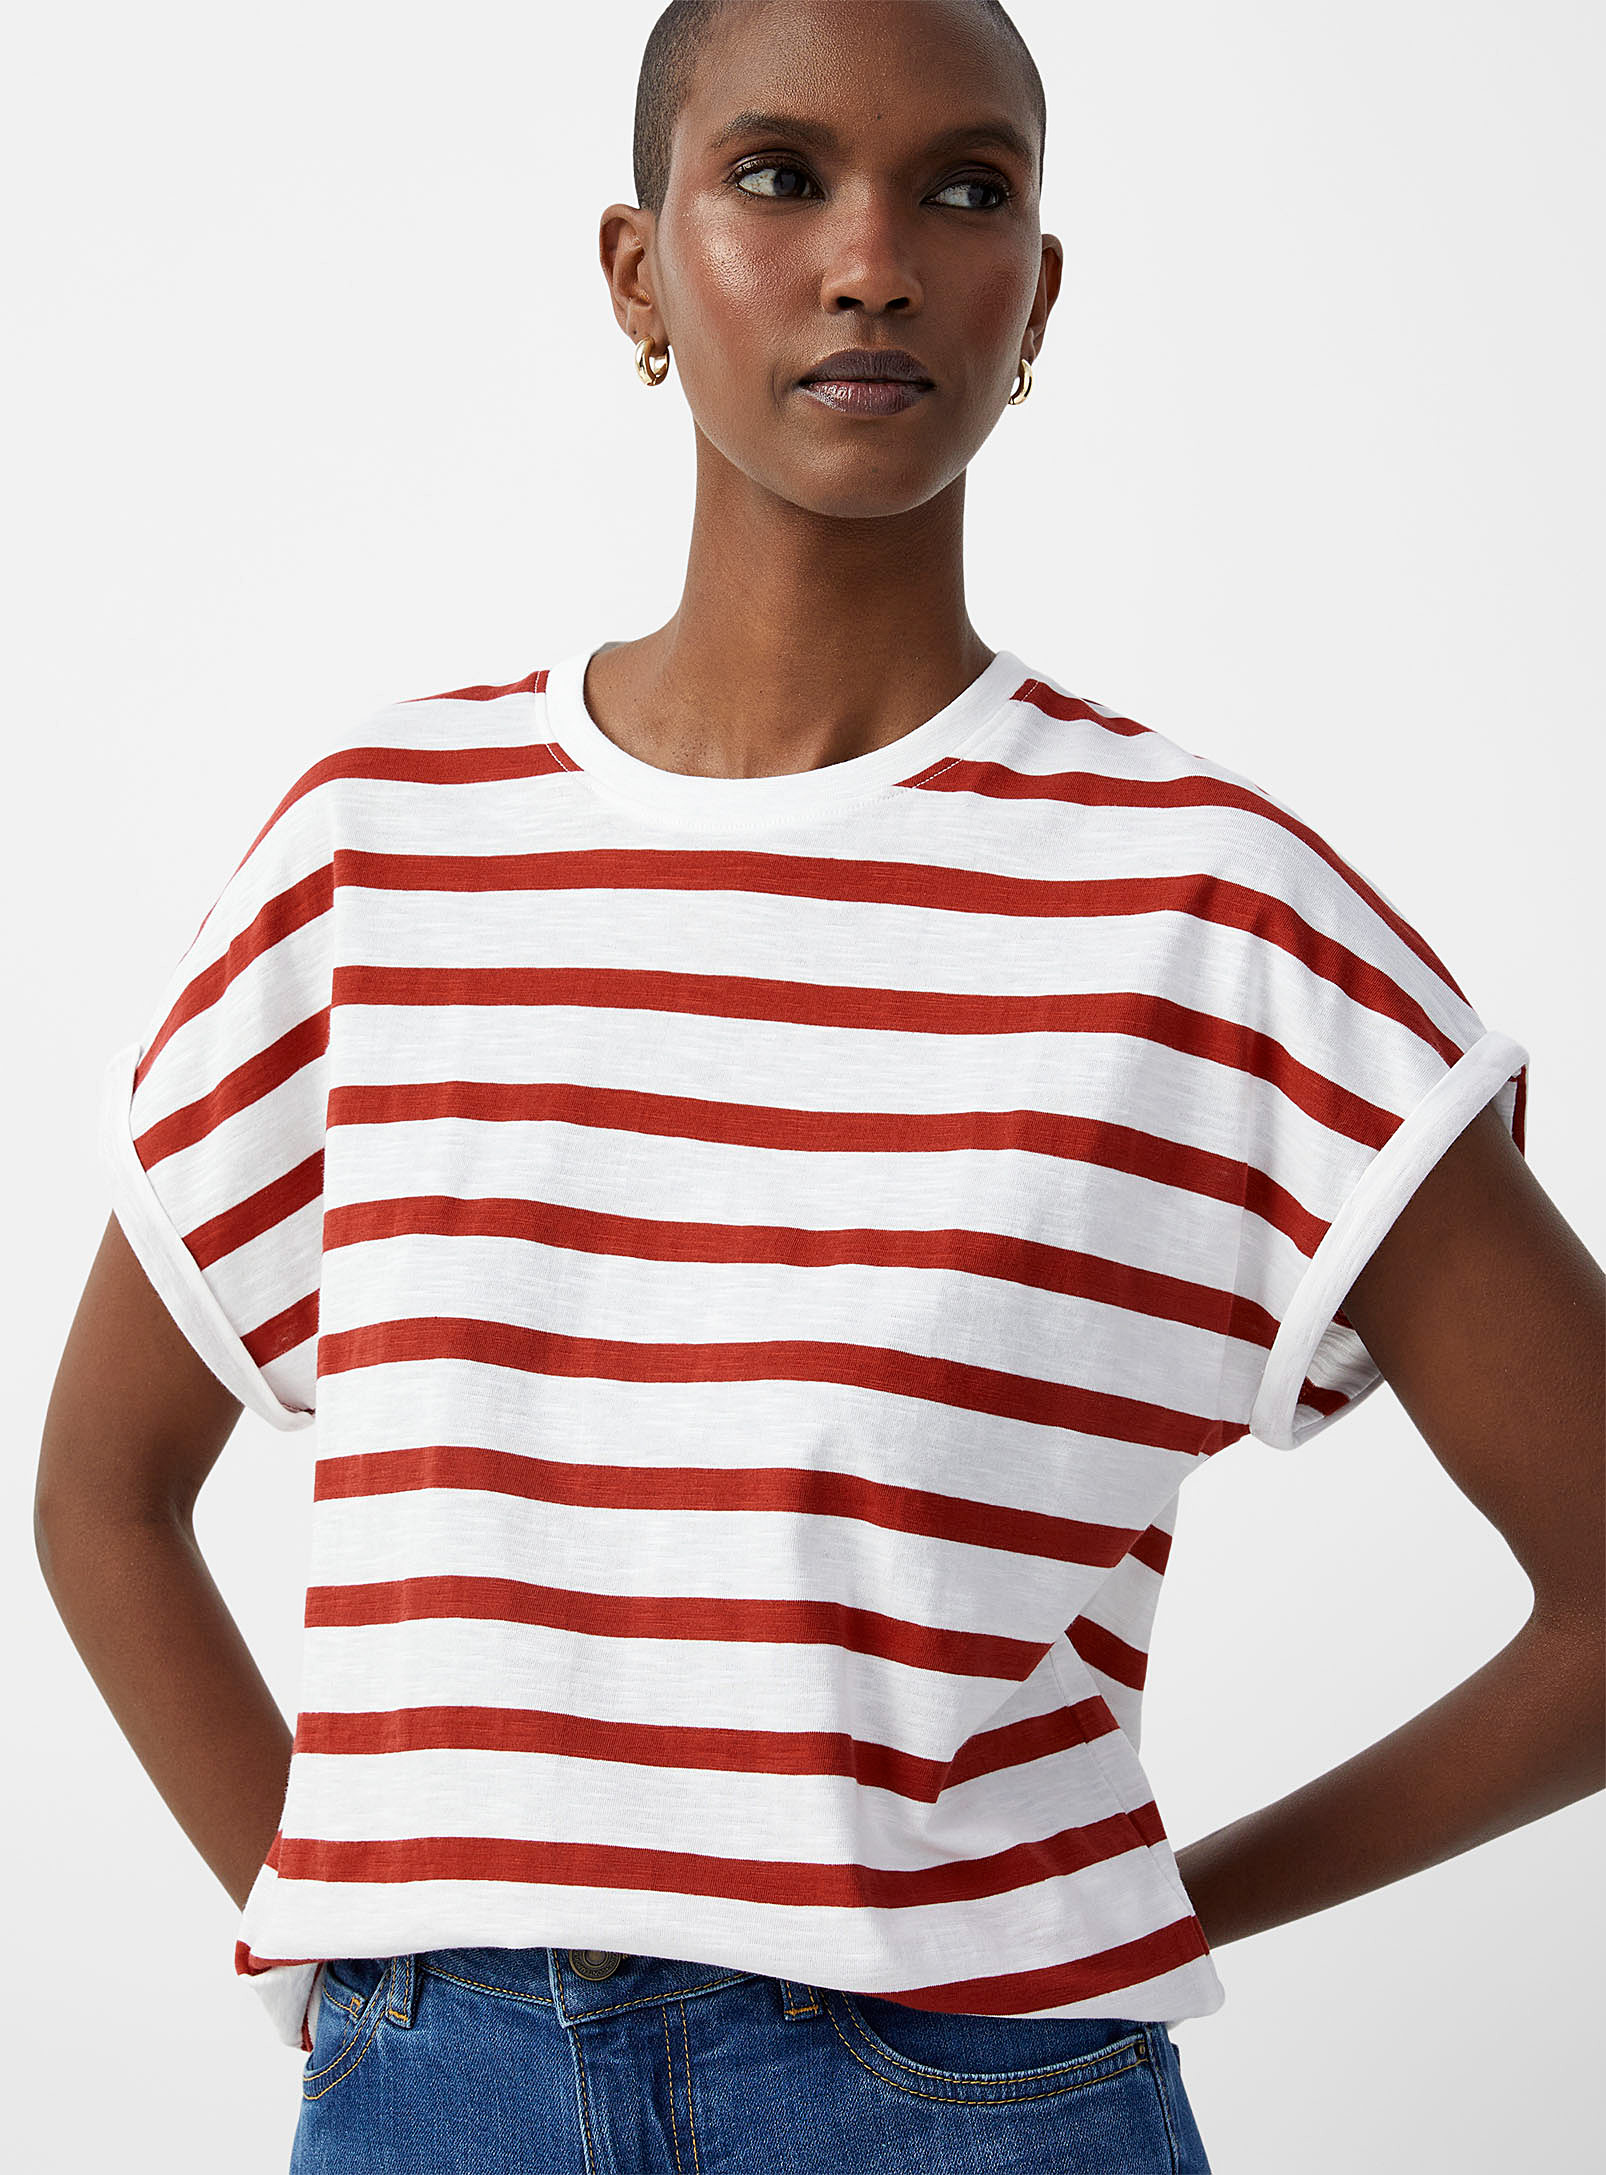 Contemporaine Horizontal Stripe Cap-sleeve T-shirt In Patterned Red